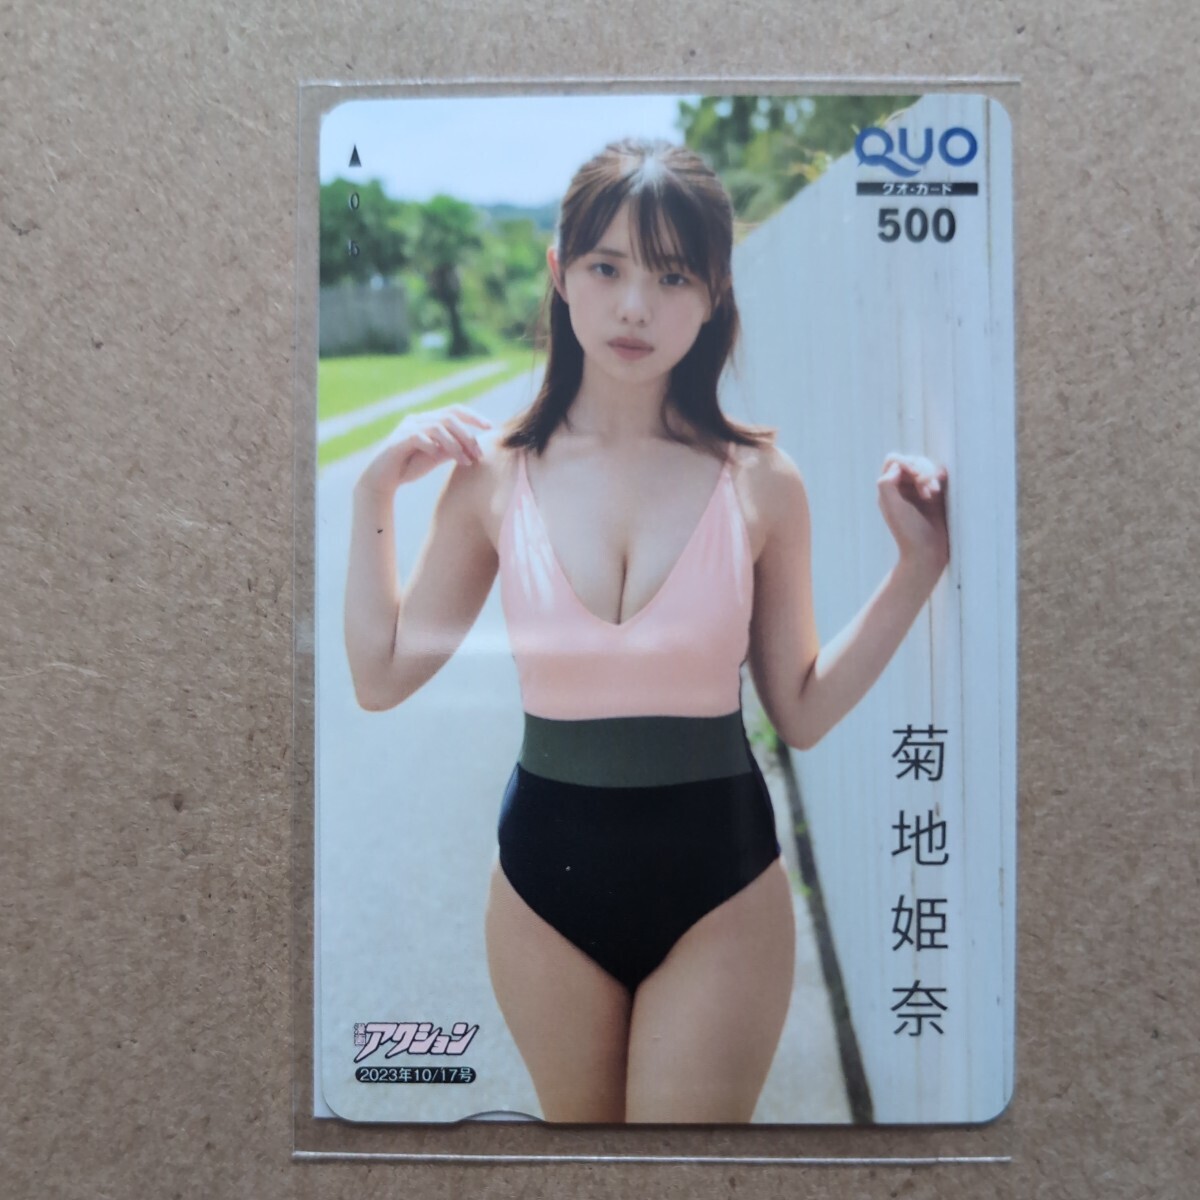 . ground .. unused QUO card 3 sheets manga action application person all member service QUO card 